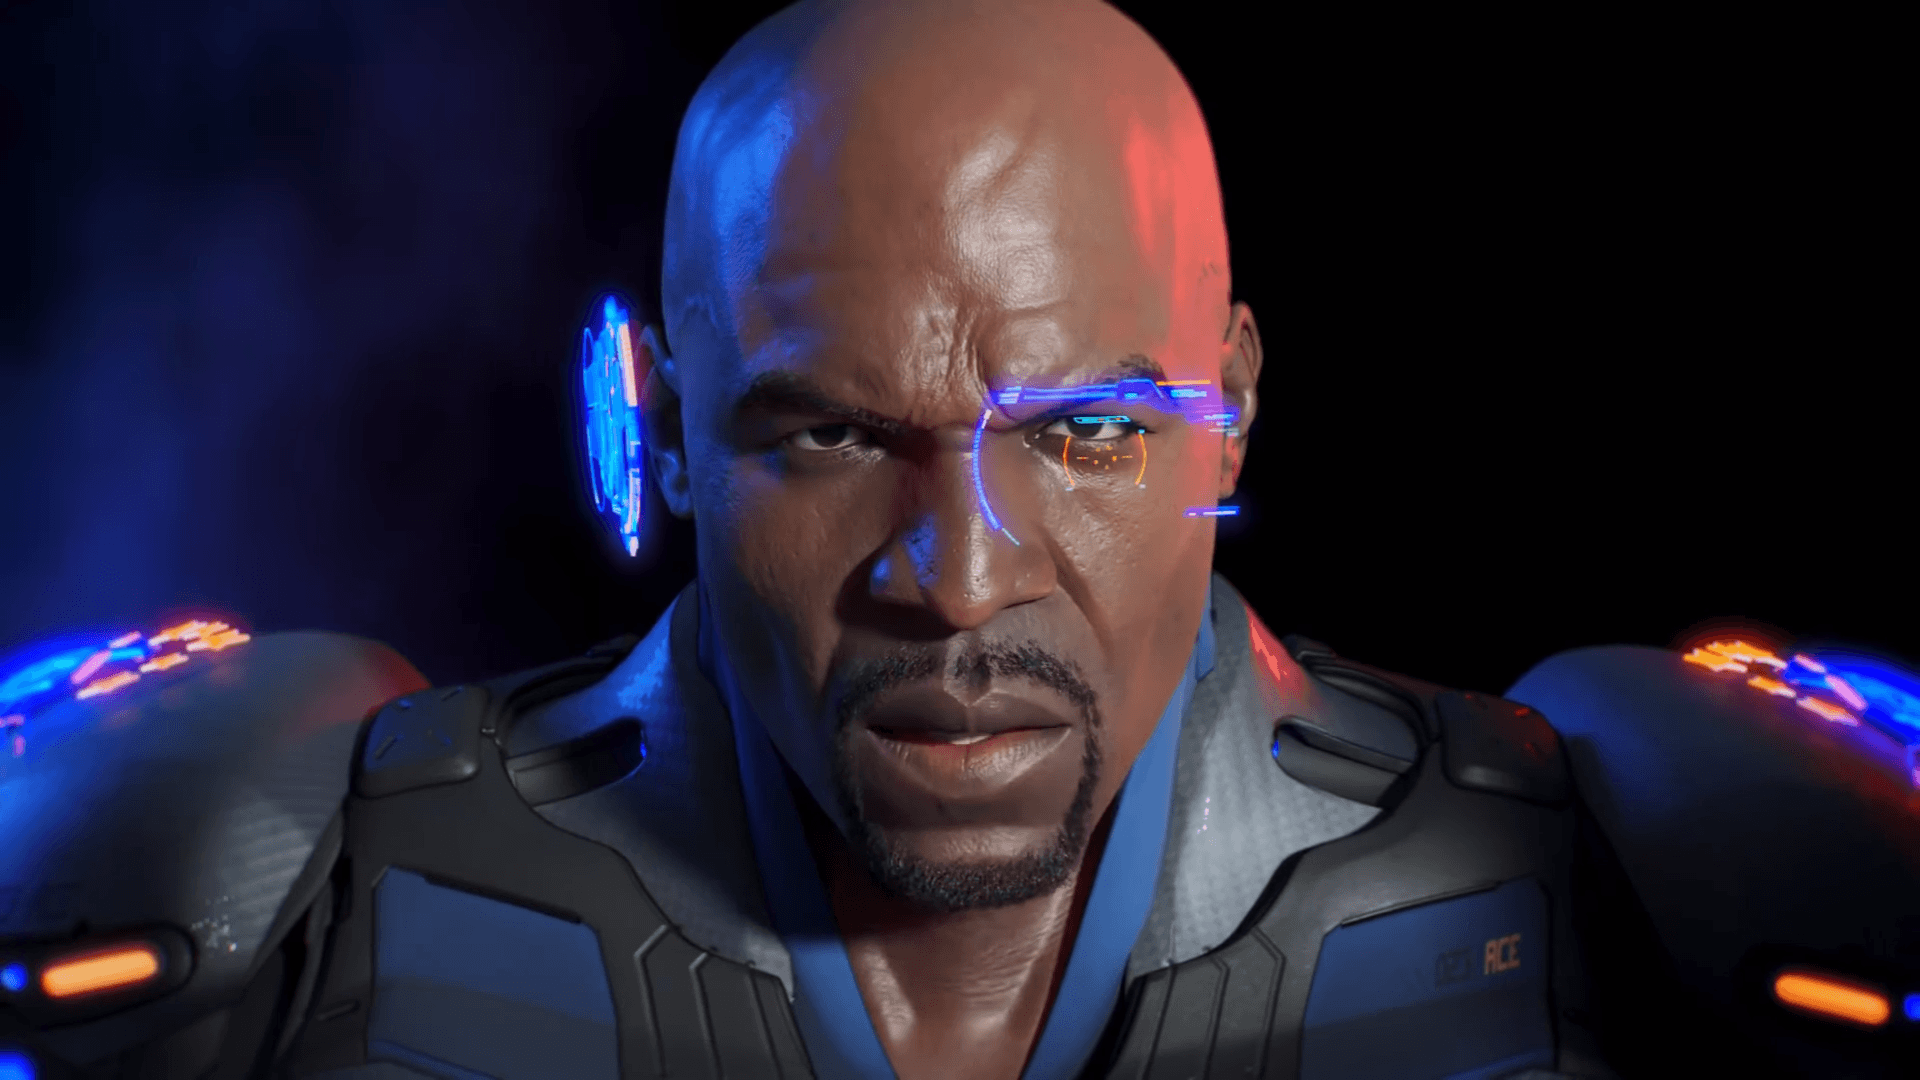 Crackdown 3 trailer confirms Terry Crews is in the game as